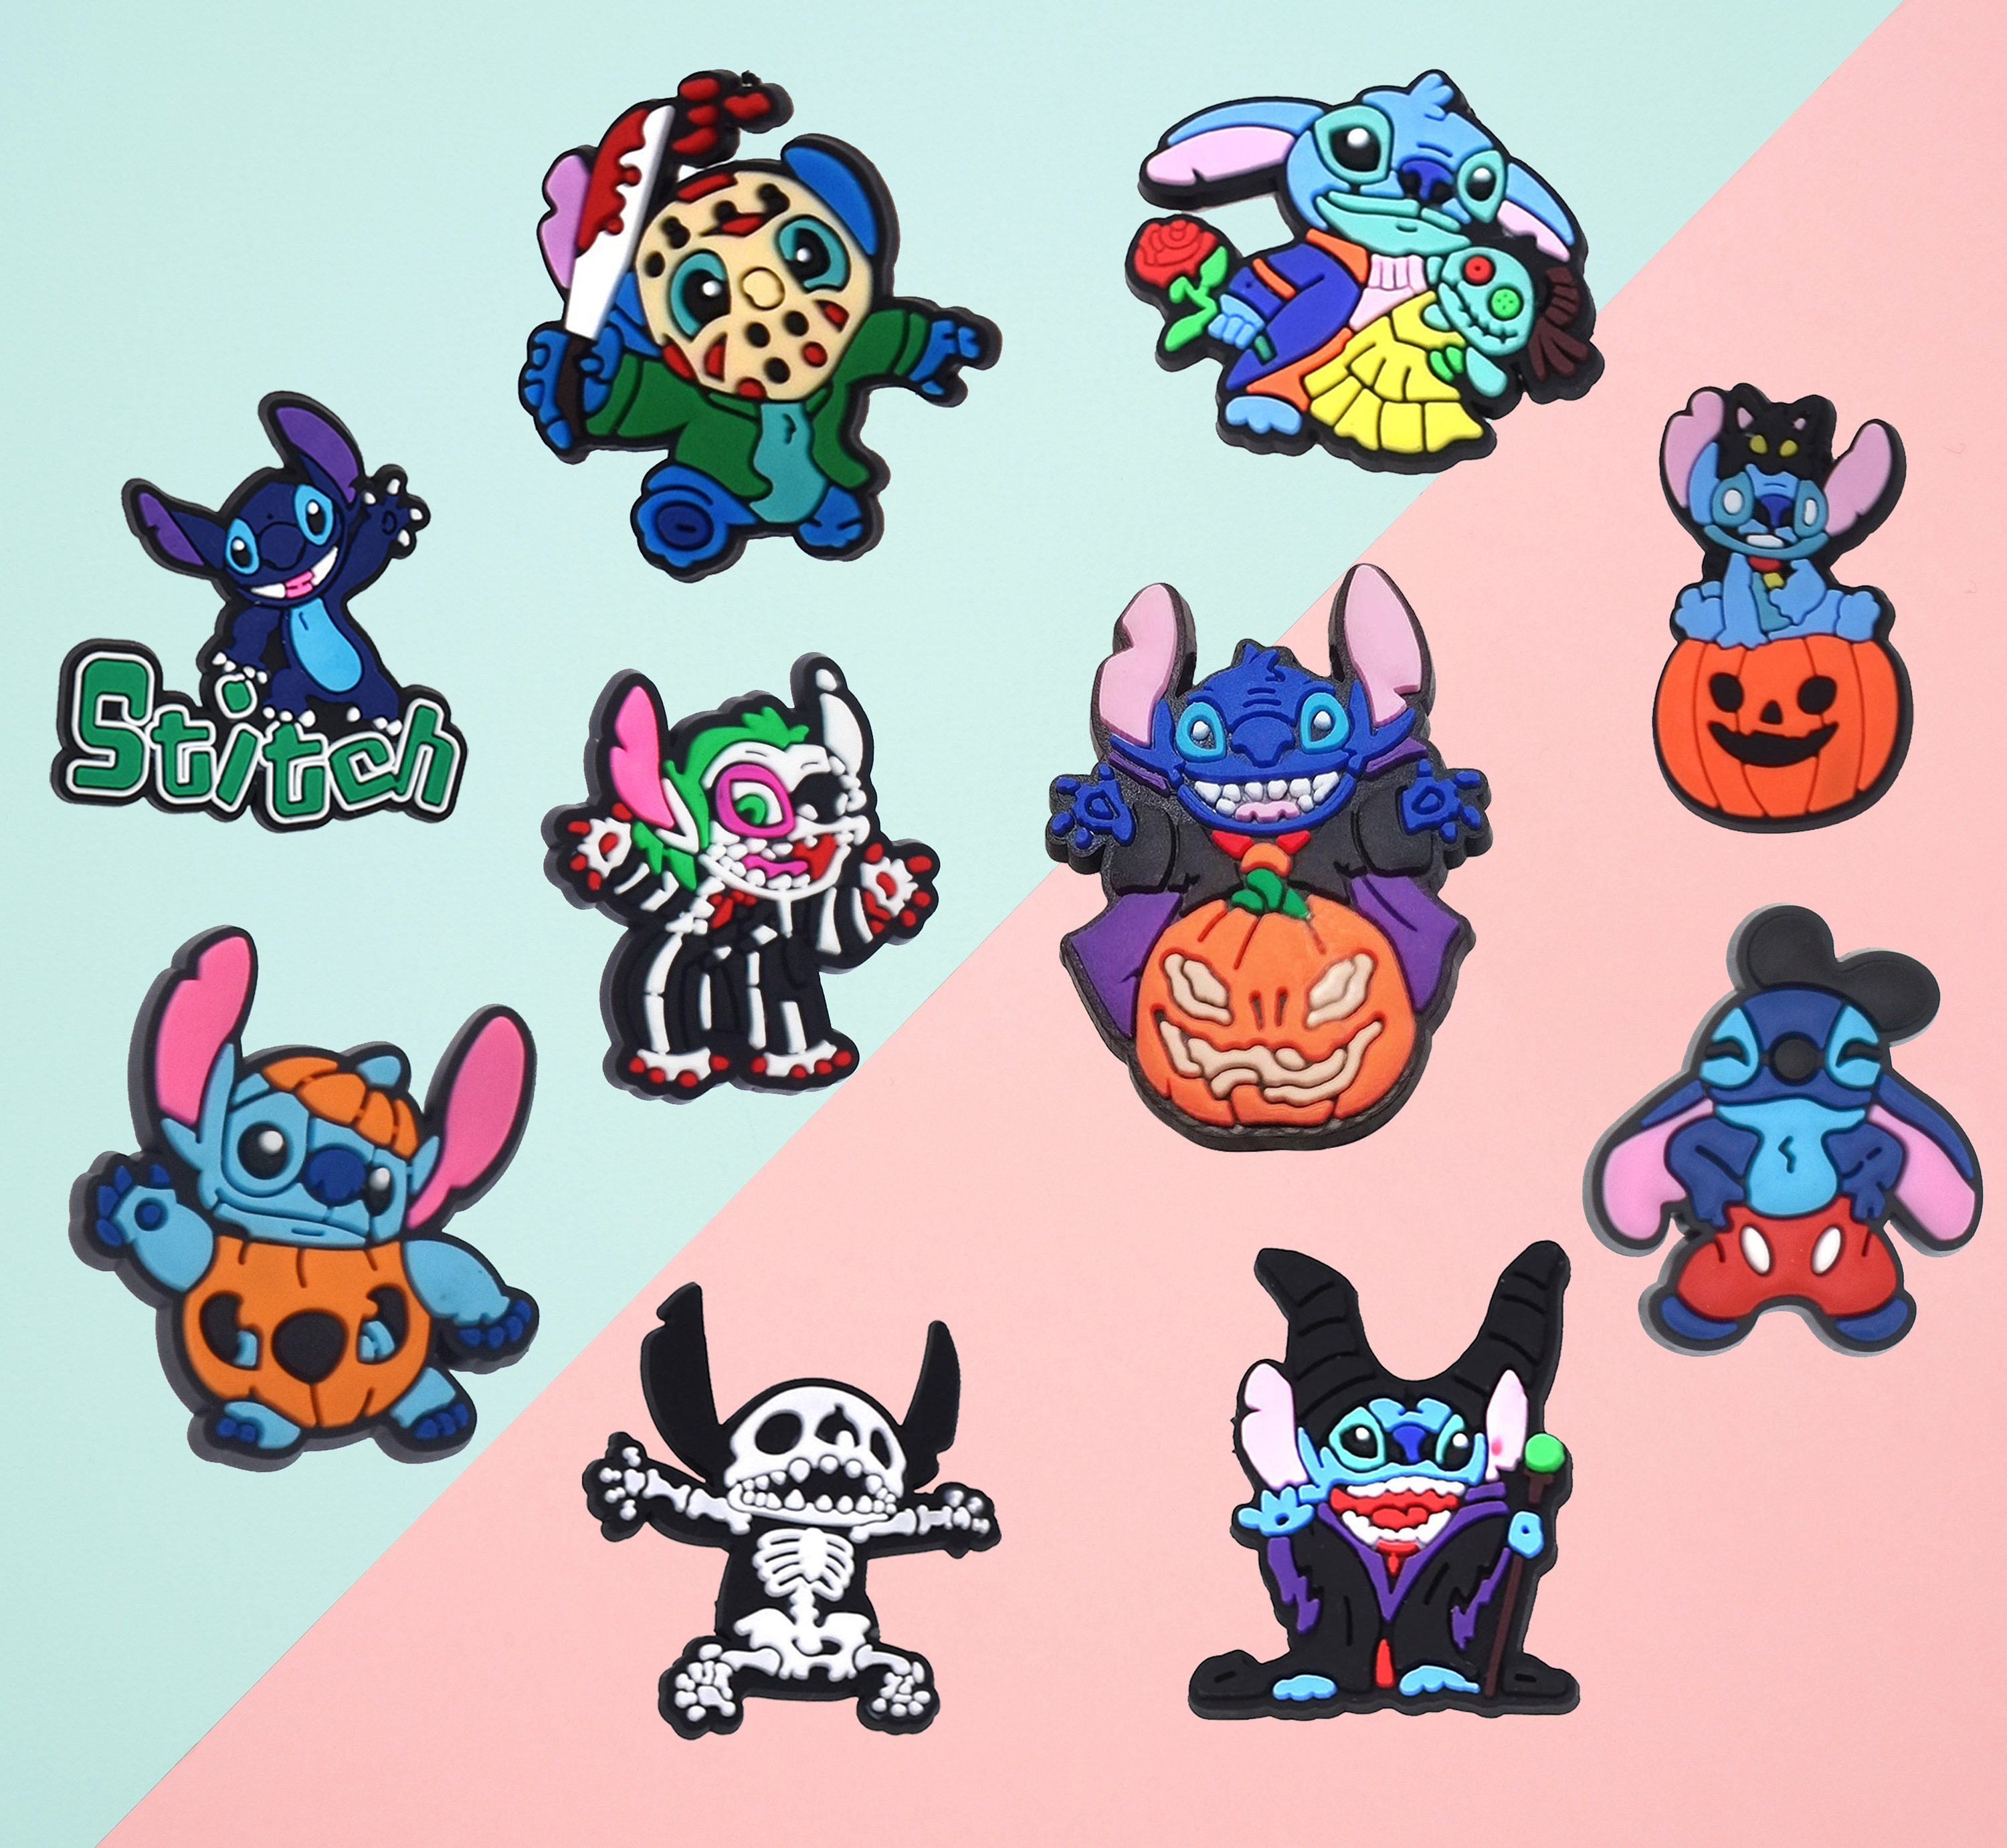 Stitch known as experiment 626 croc charms